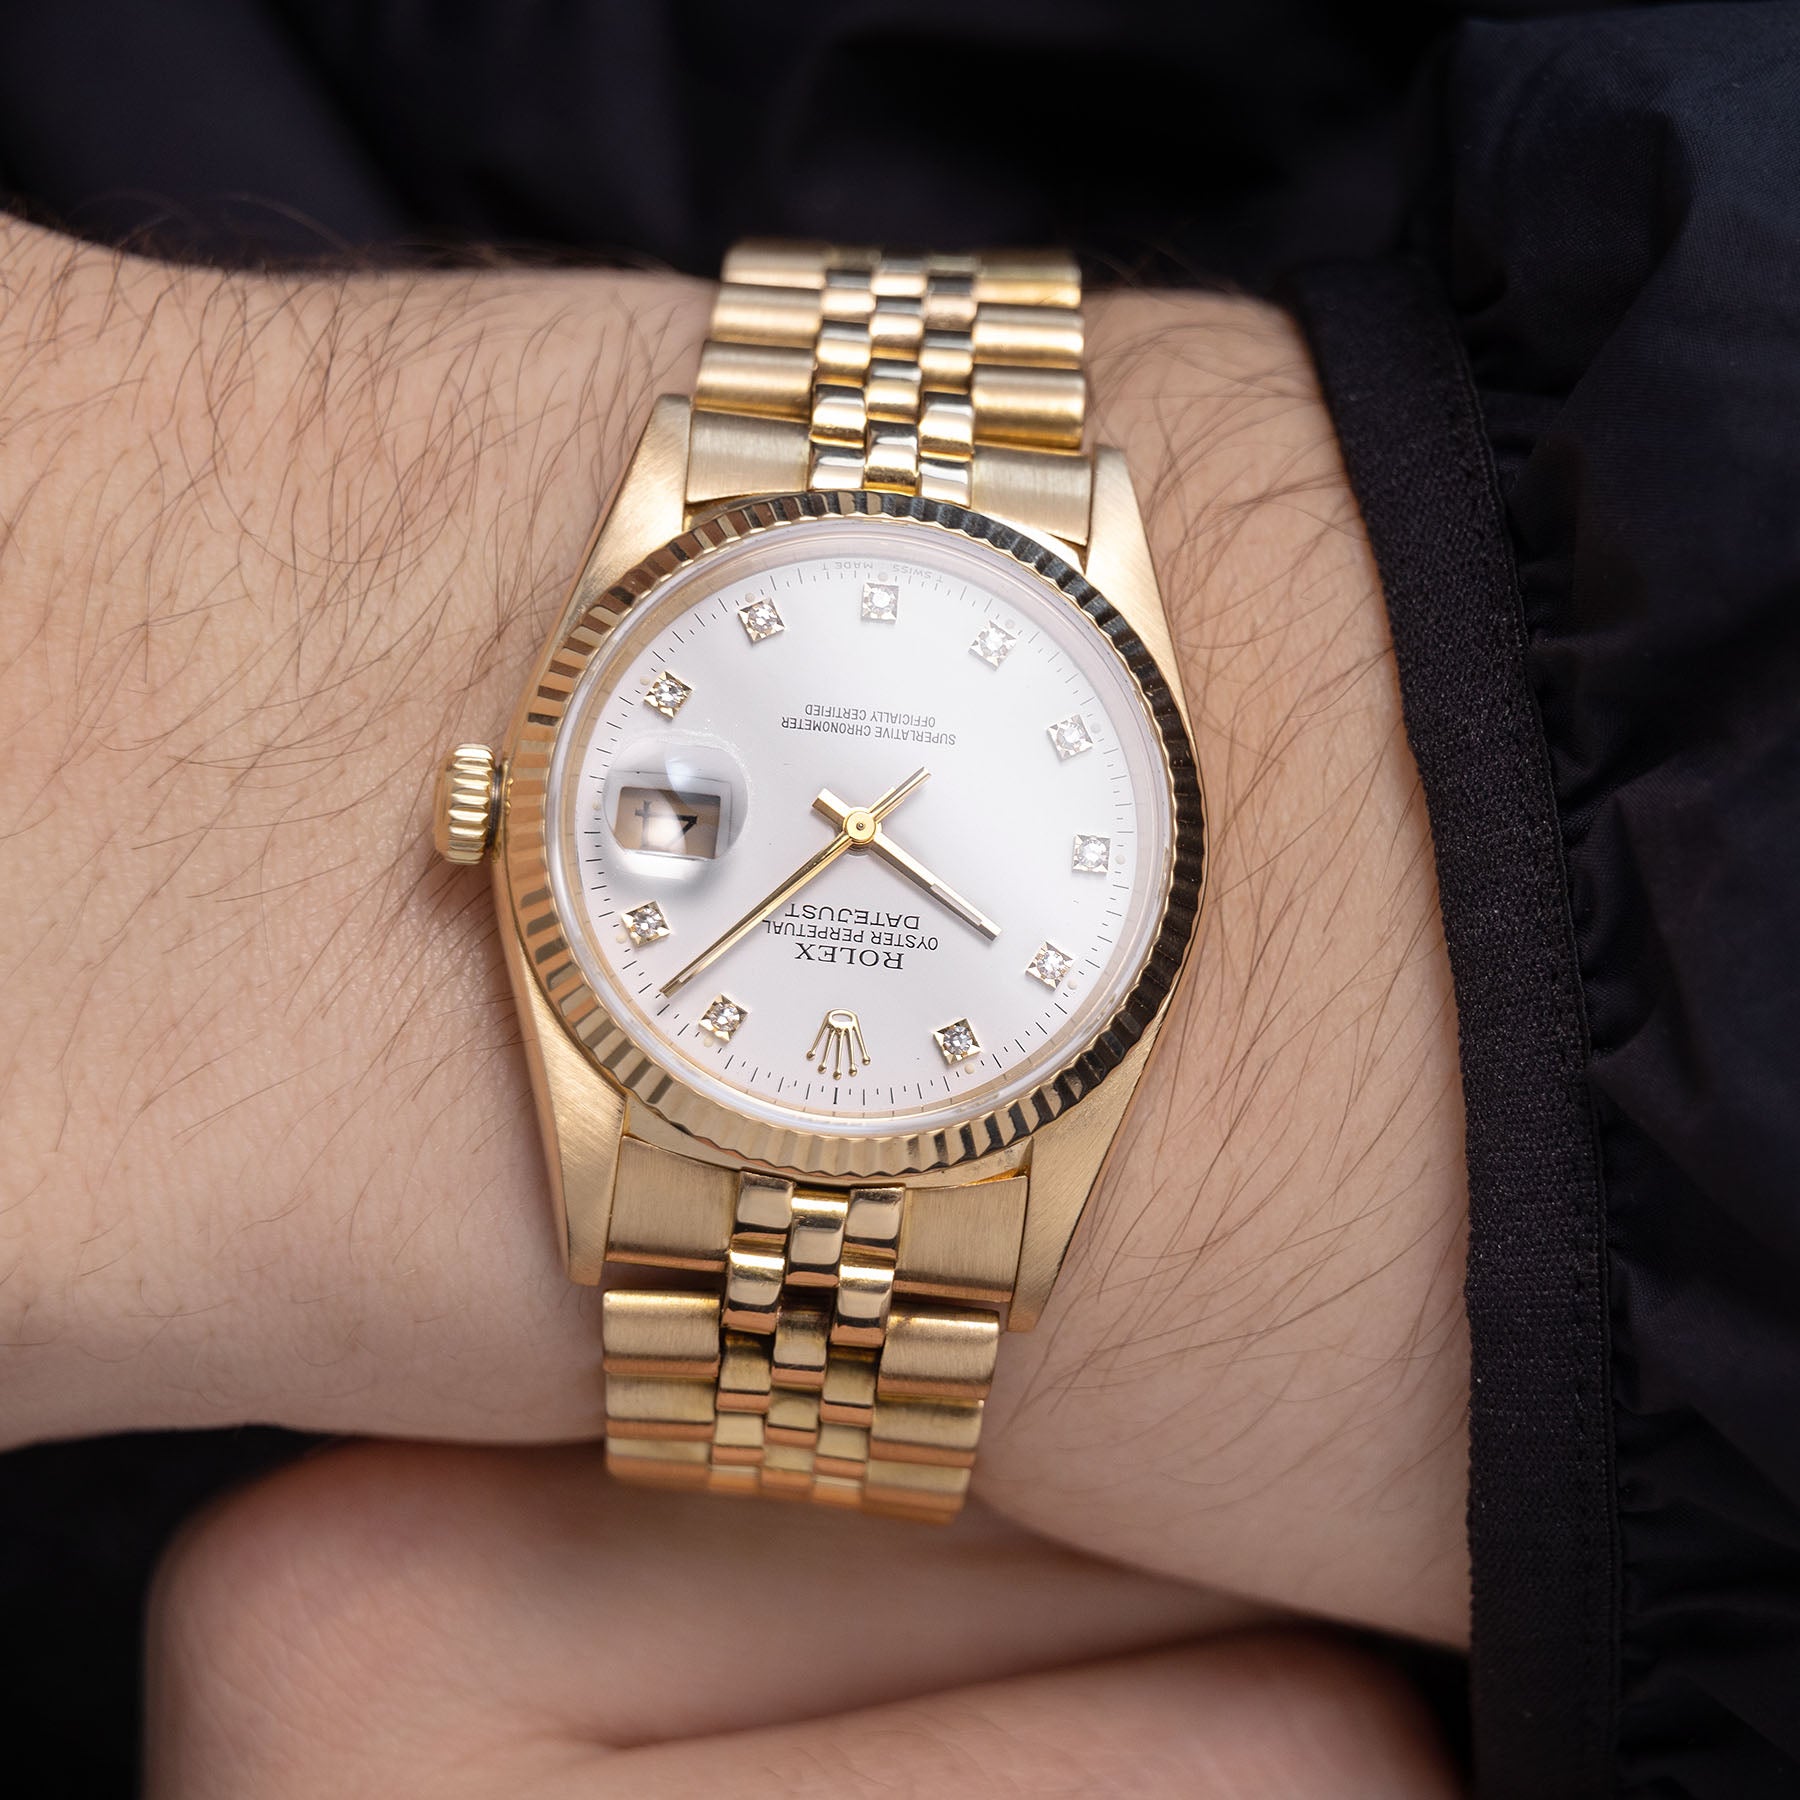 Rolex Datejust Yellow Gold White Diamond Hours Dial 16018